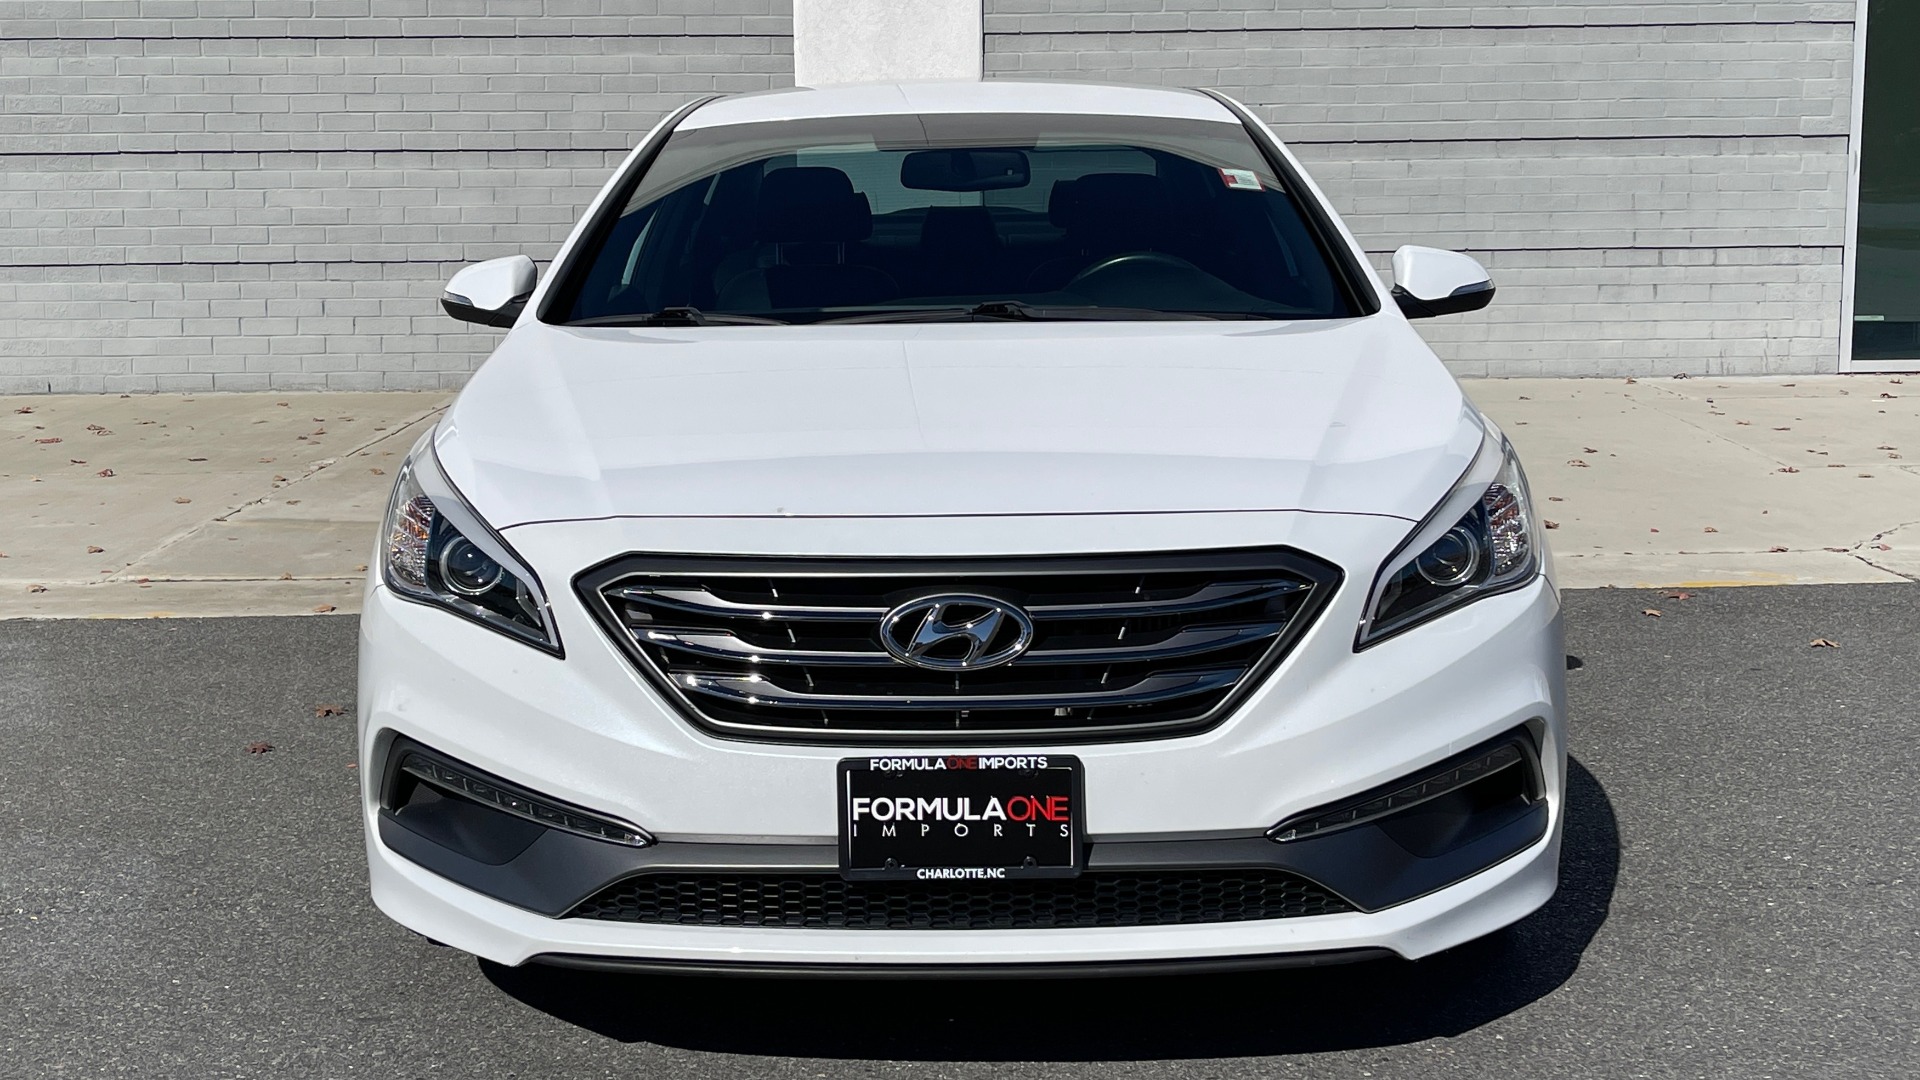 Used 2015 Hyundai SONATA 2.0T SPORT SEDAN / 6-SPD AUTO / BLIND SPOT / REARVIEW for sale Sold at Formula Imports in Charlotte NC 28227 7